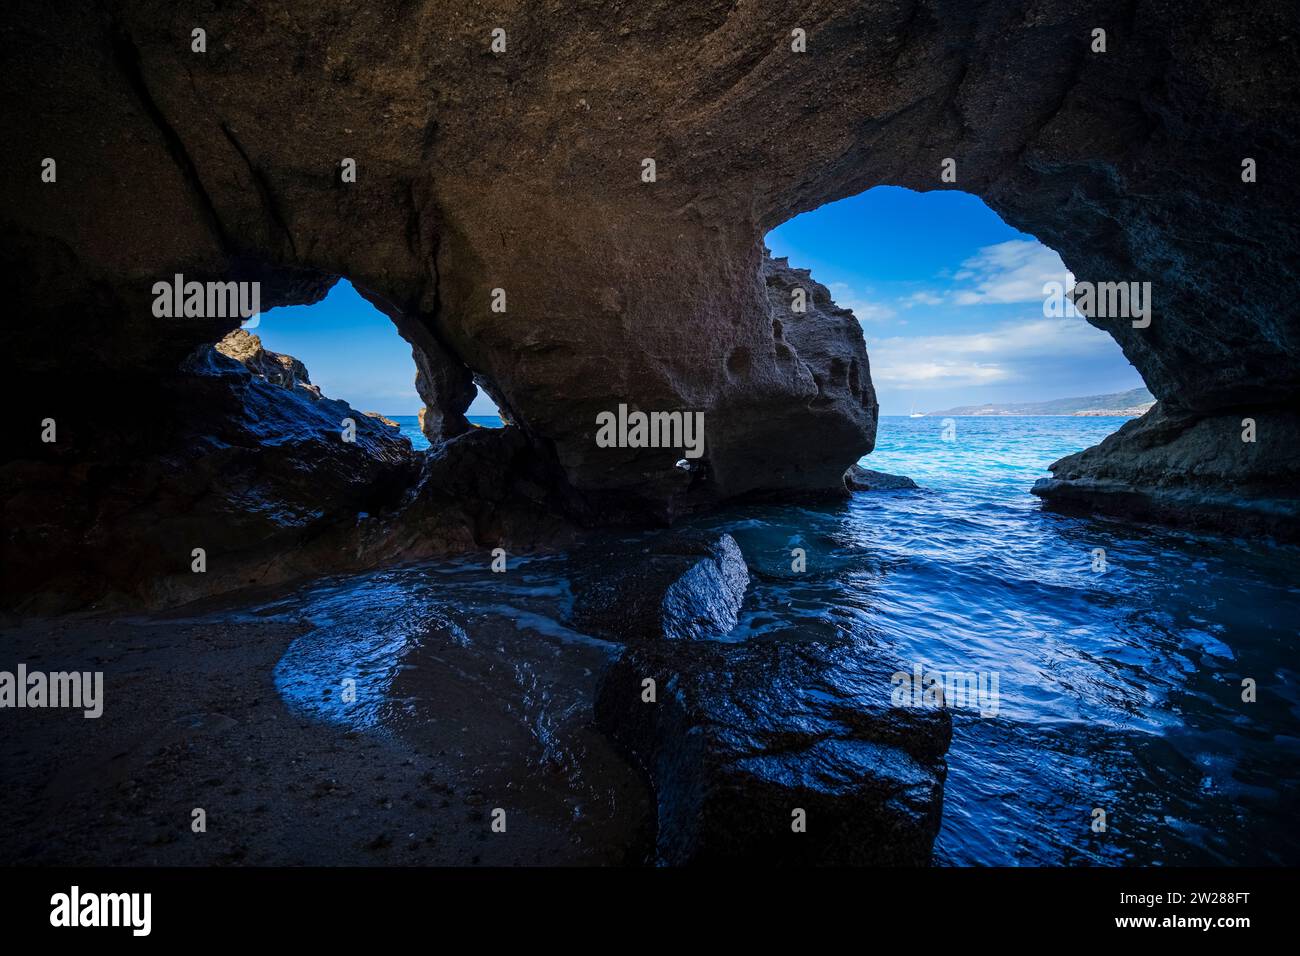 Grotta del Palombaro, a cave below the Santa Maria dell'Isola monastery, which is located on a rock on the coast. Stock Photo